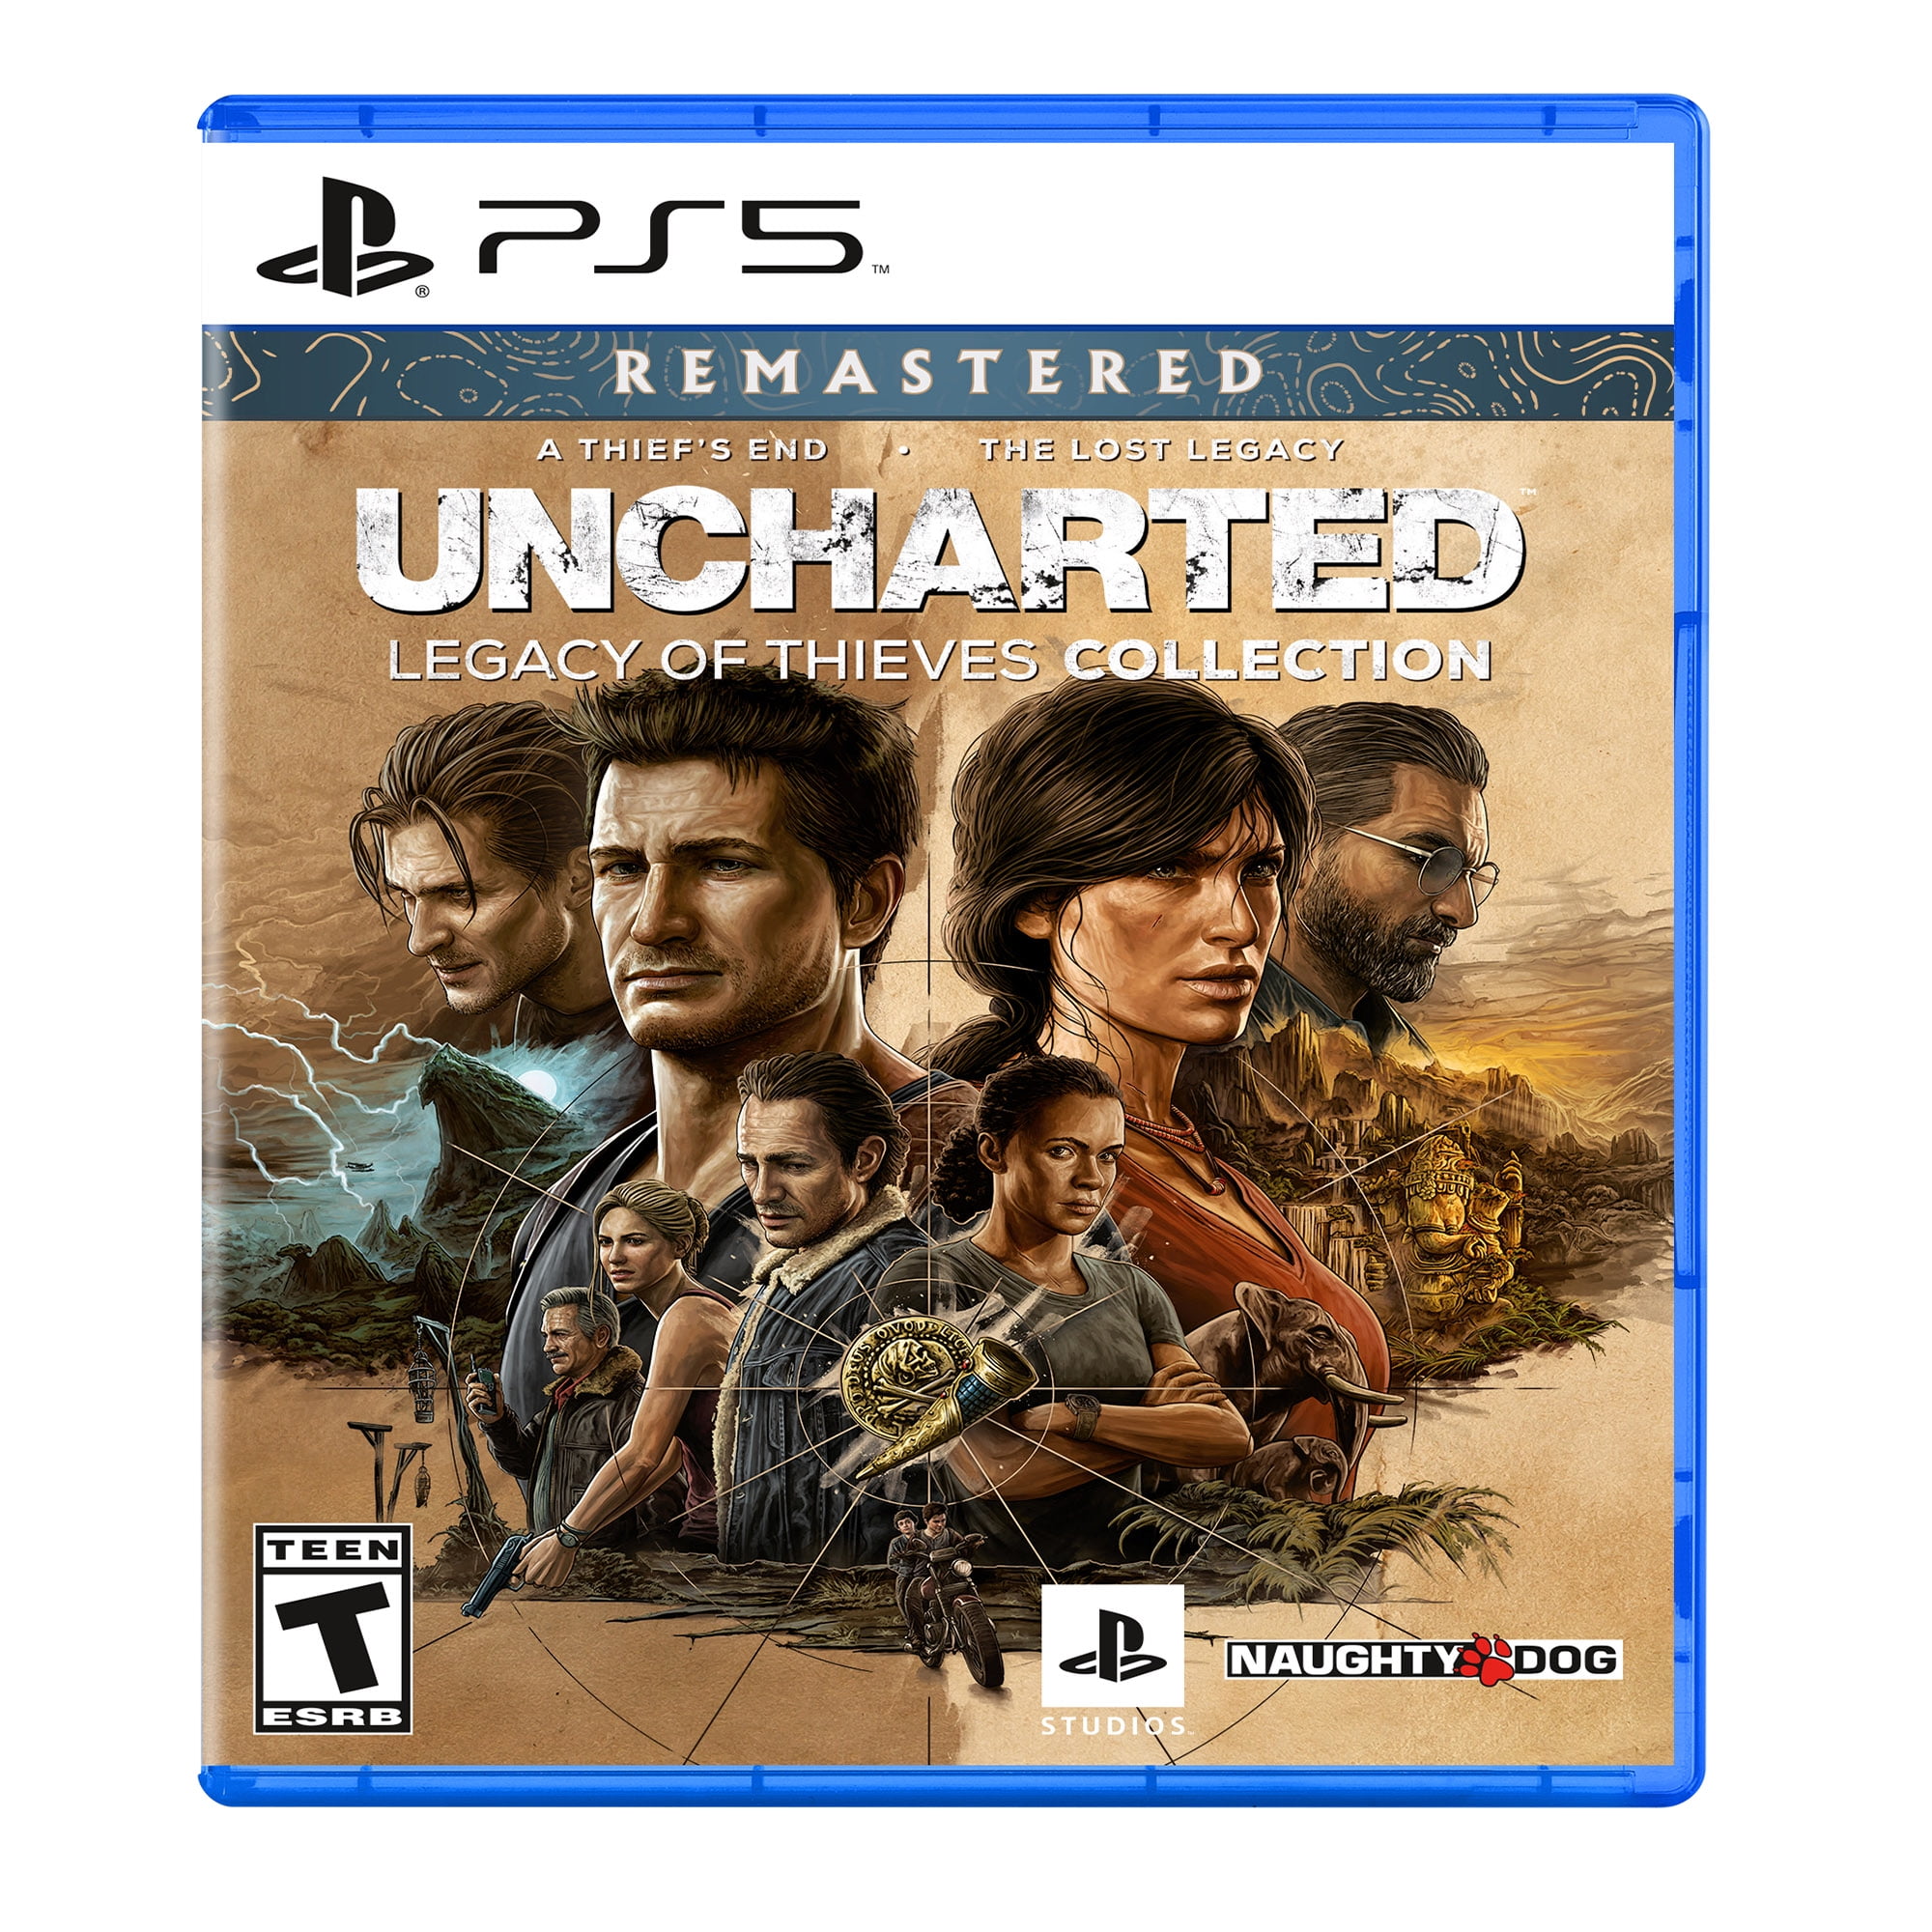 What is the story in UNCHARTED: Legacy of Thieves Collection about?